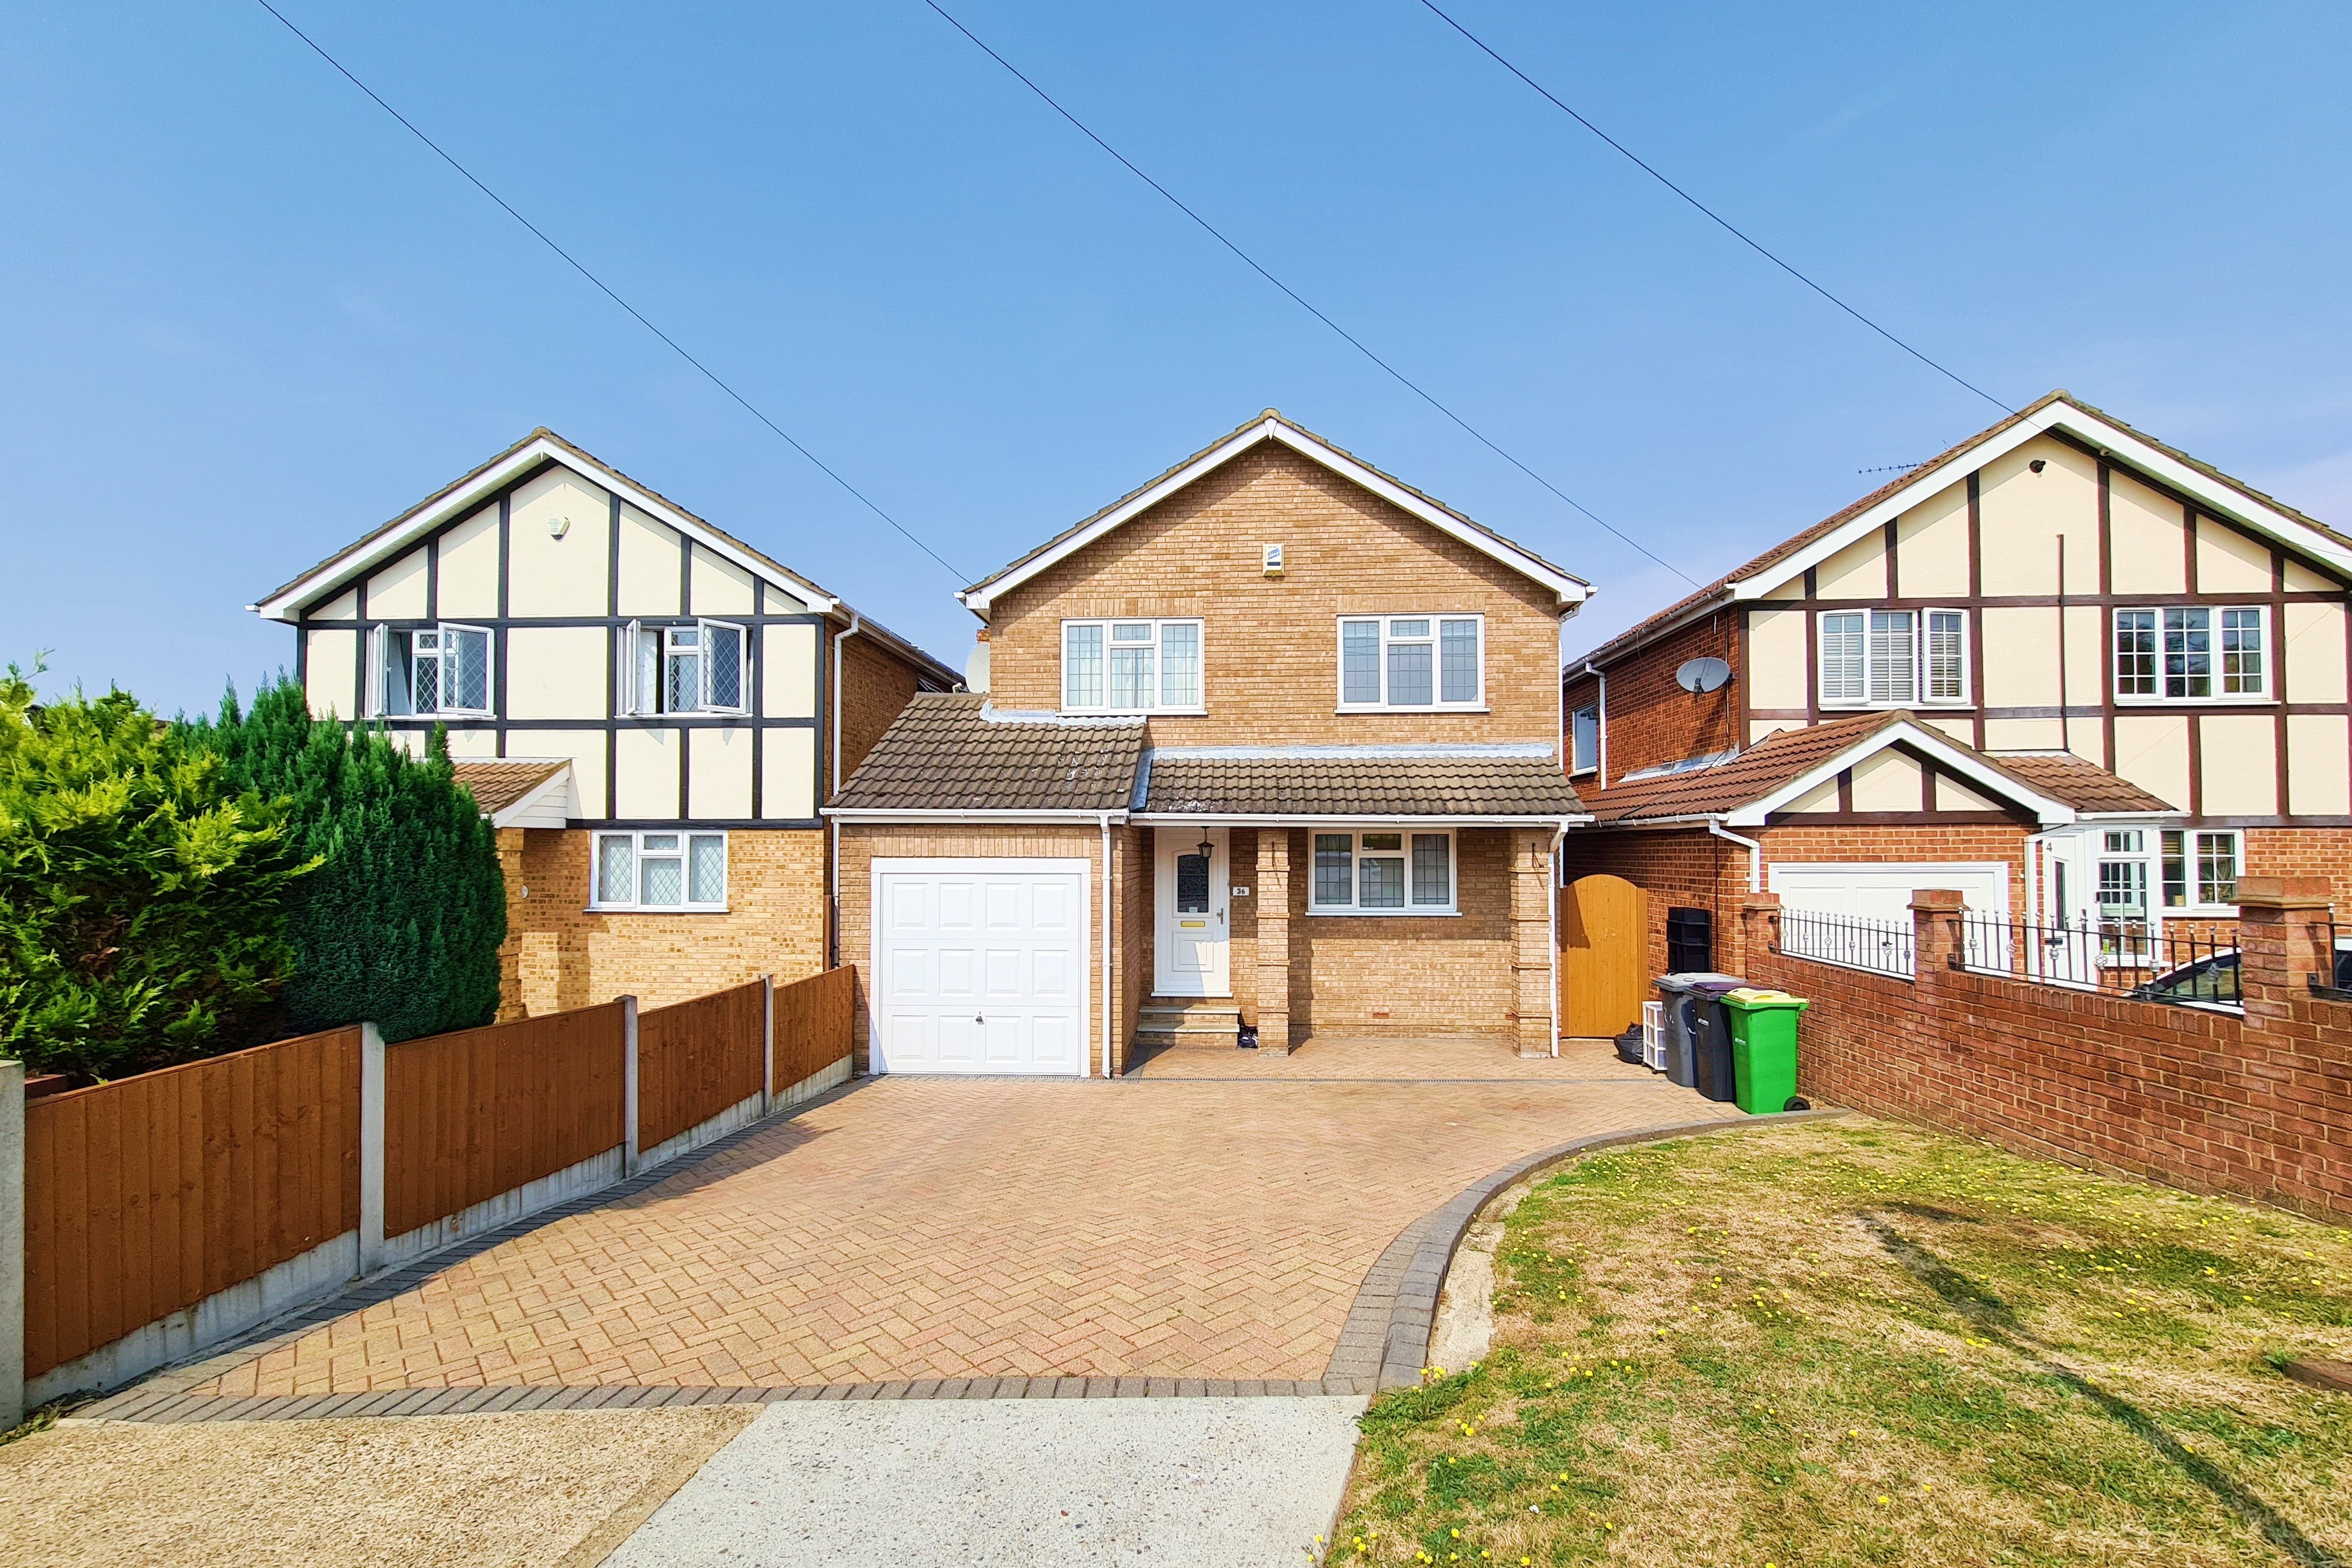 4 bed detached house to rent in Daws Heath Road, Rayleigh - Property Image 1